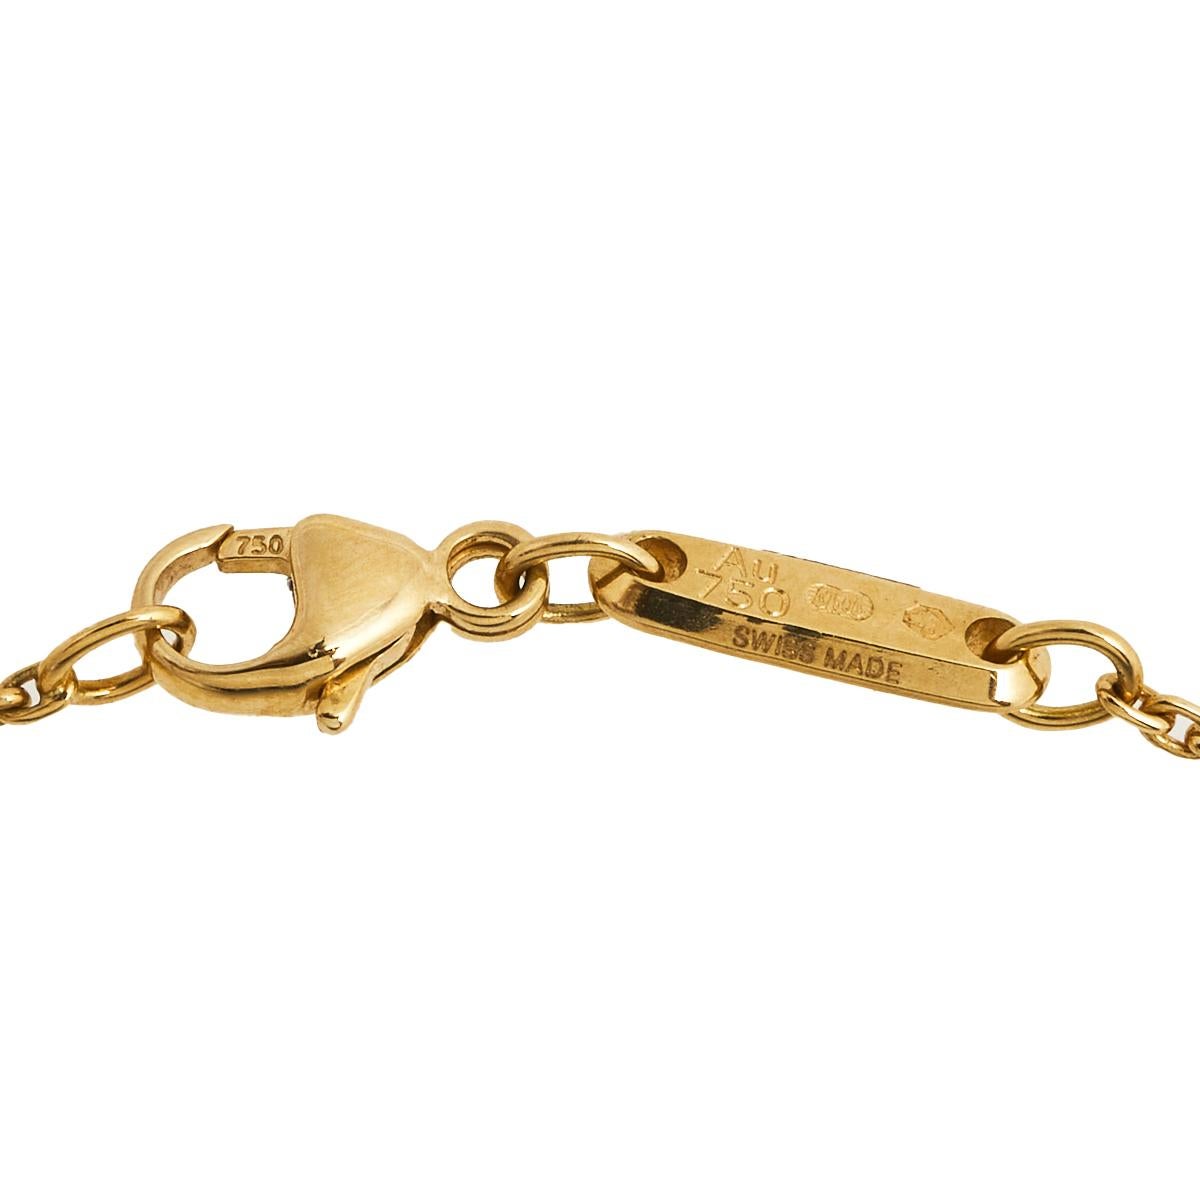 Chopard's Ice Cube collection has delivered some of the most luxurious jewelry pieces since 1999. Minimal yet classic, this tasteful Chopard Ice Cube bracelet is made from 18k yellow gold. It has a simple chain and a stunning charm showcasing a